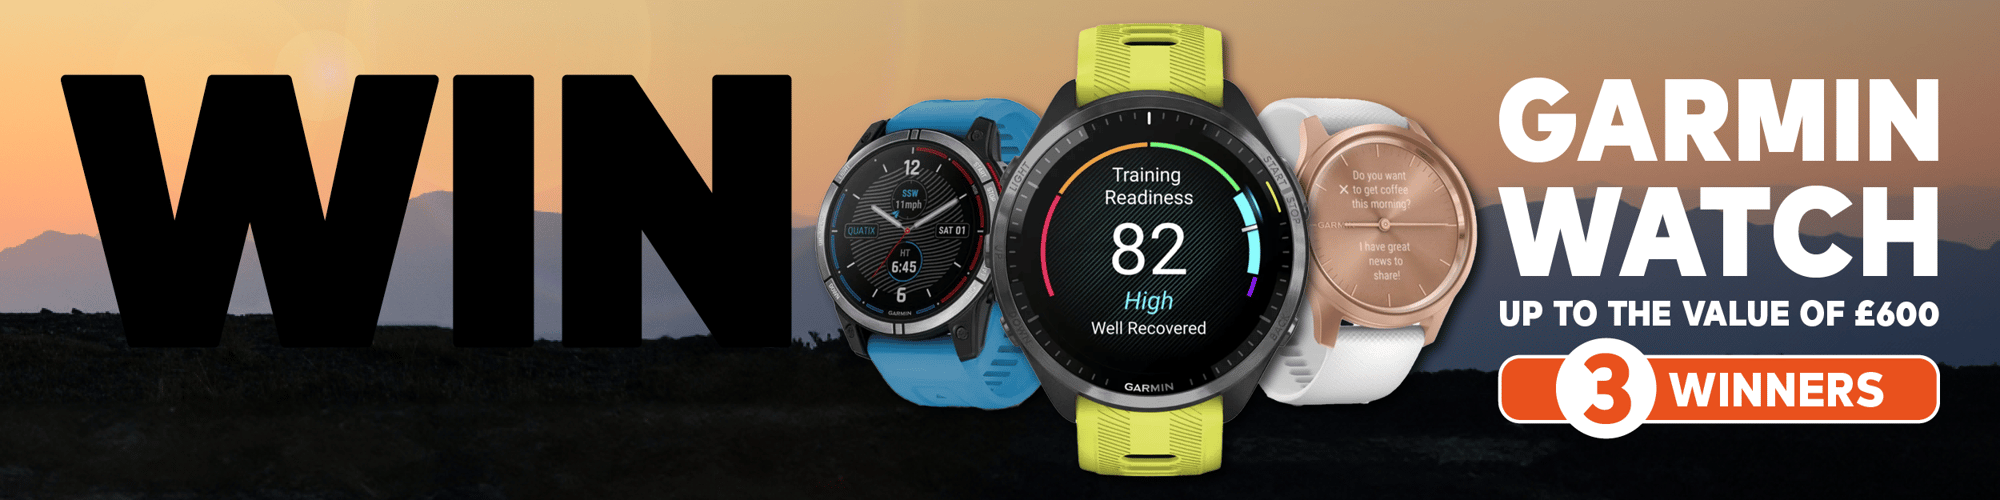 WIN a Garmin Watch up to the value of £600 - ENTER NOW